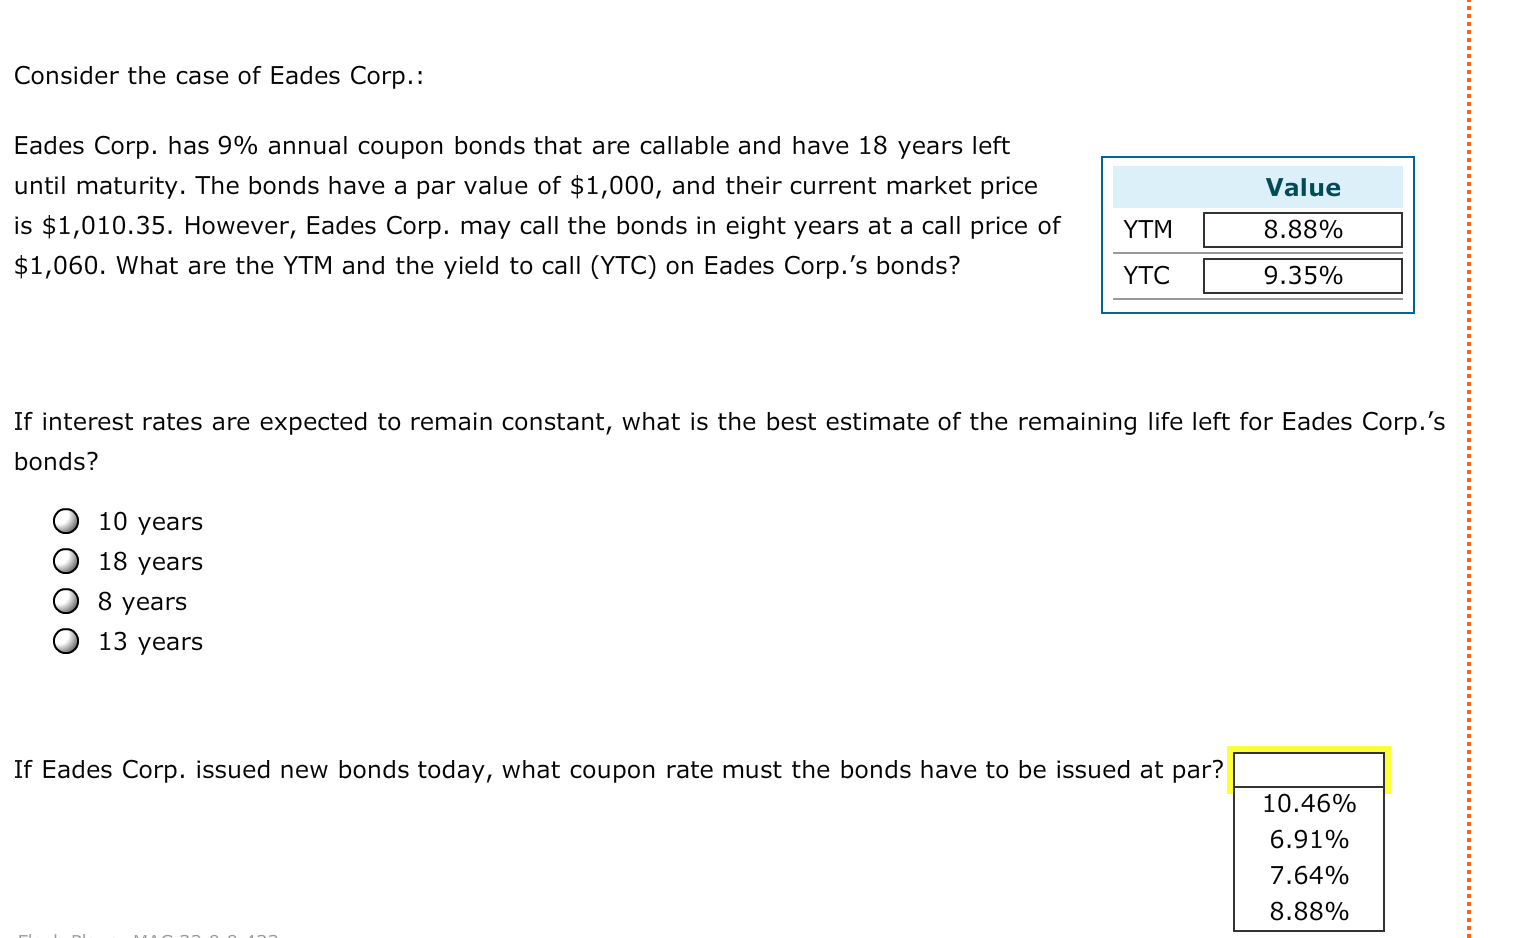 Eades Corp. has 9% annual coupon bonds that are callable and have 18 years left
until maturity. The bonds have a par value of $1,000, and their current market price
Value
is $1,010.35. However, Eades Corp. may call the bonds in eight years at a call price of
$1,060. What are the YTM and the yield to call (YTC) on Eades Corp.'s bonds?
YTM
8.88%
YTC
9.35%
If interest rates are expected to remain constant, what is the best estimate of the remaining life left for Eades Corp.'s
bonds?
10 years
18 years
8 years
13 years
If Eades Corp. issued new bonds today, what coupon rate must the bonds have to be issued at par?
10.46%
6.91%
7.64%
8.88%
